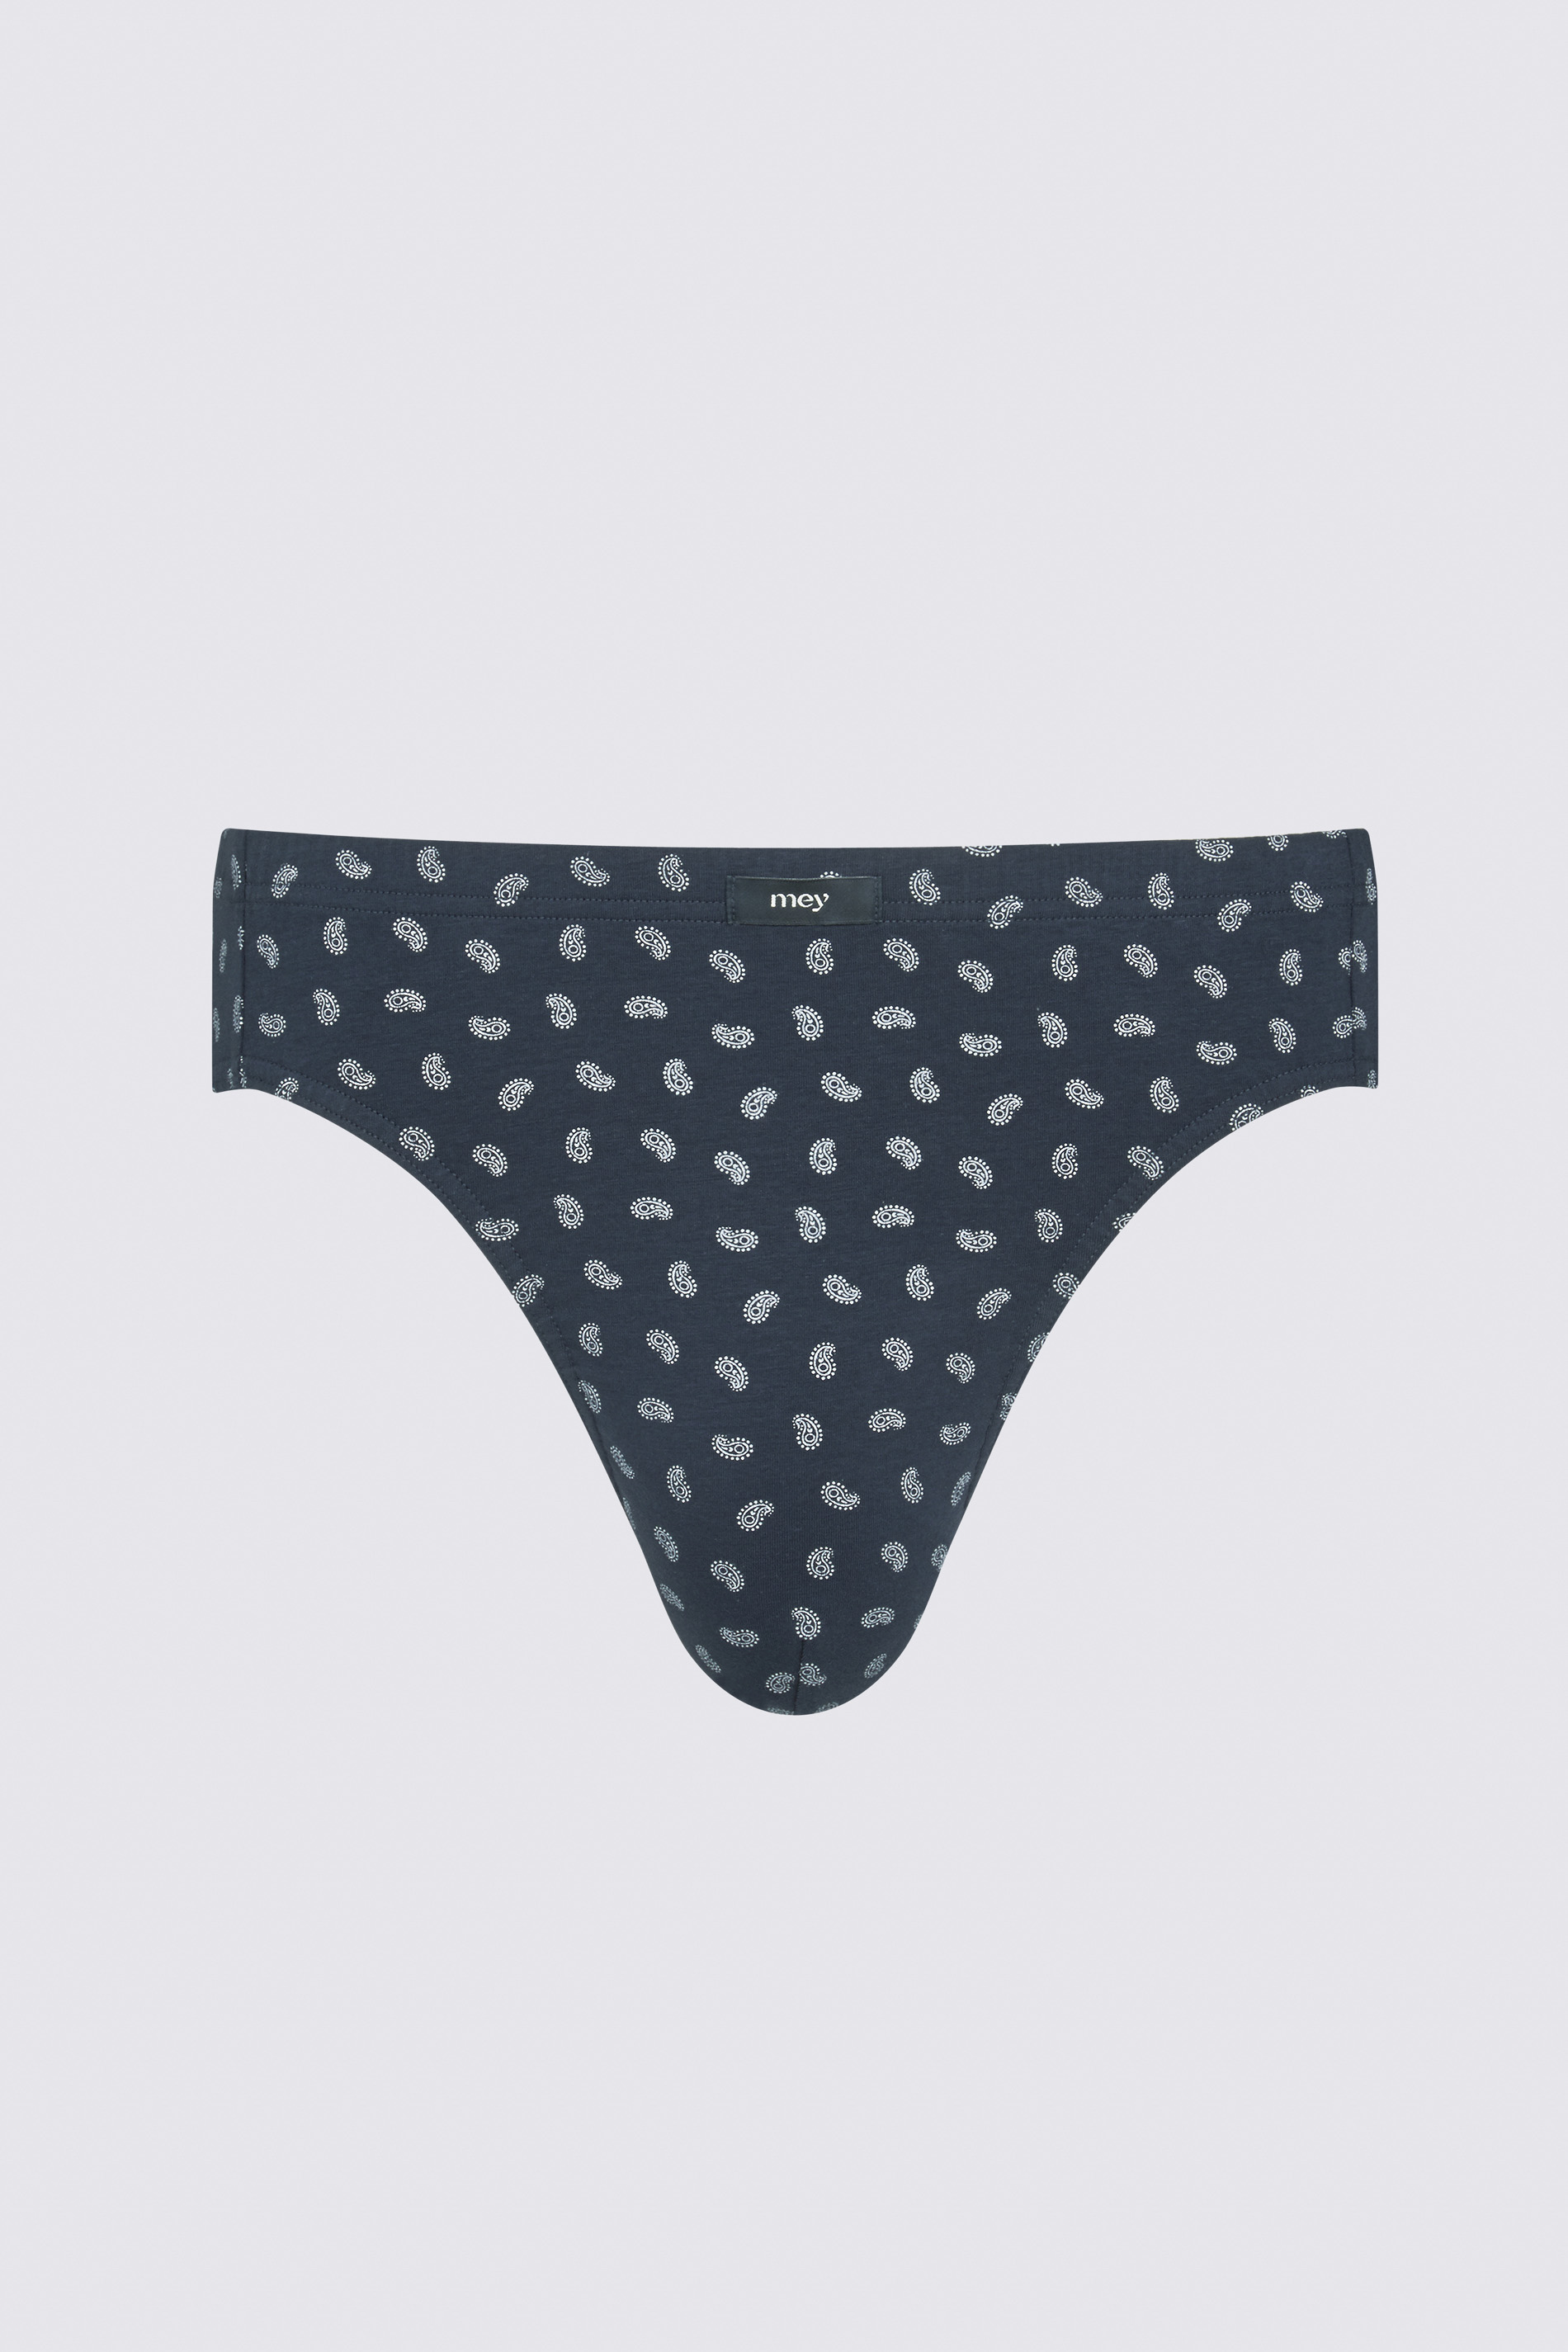 Jazz briefs Yacht Blue Serie Small Paisley Cut Out | mey®